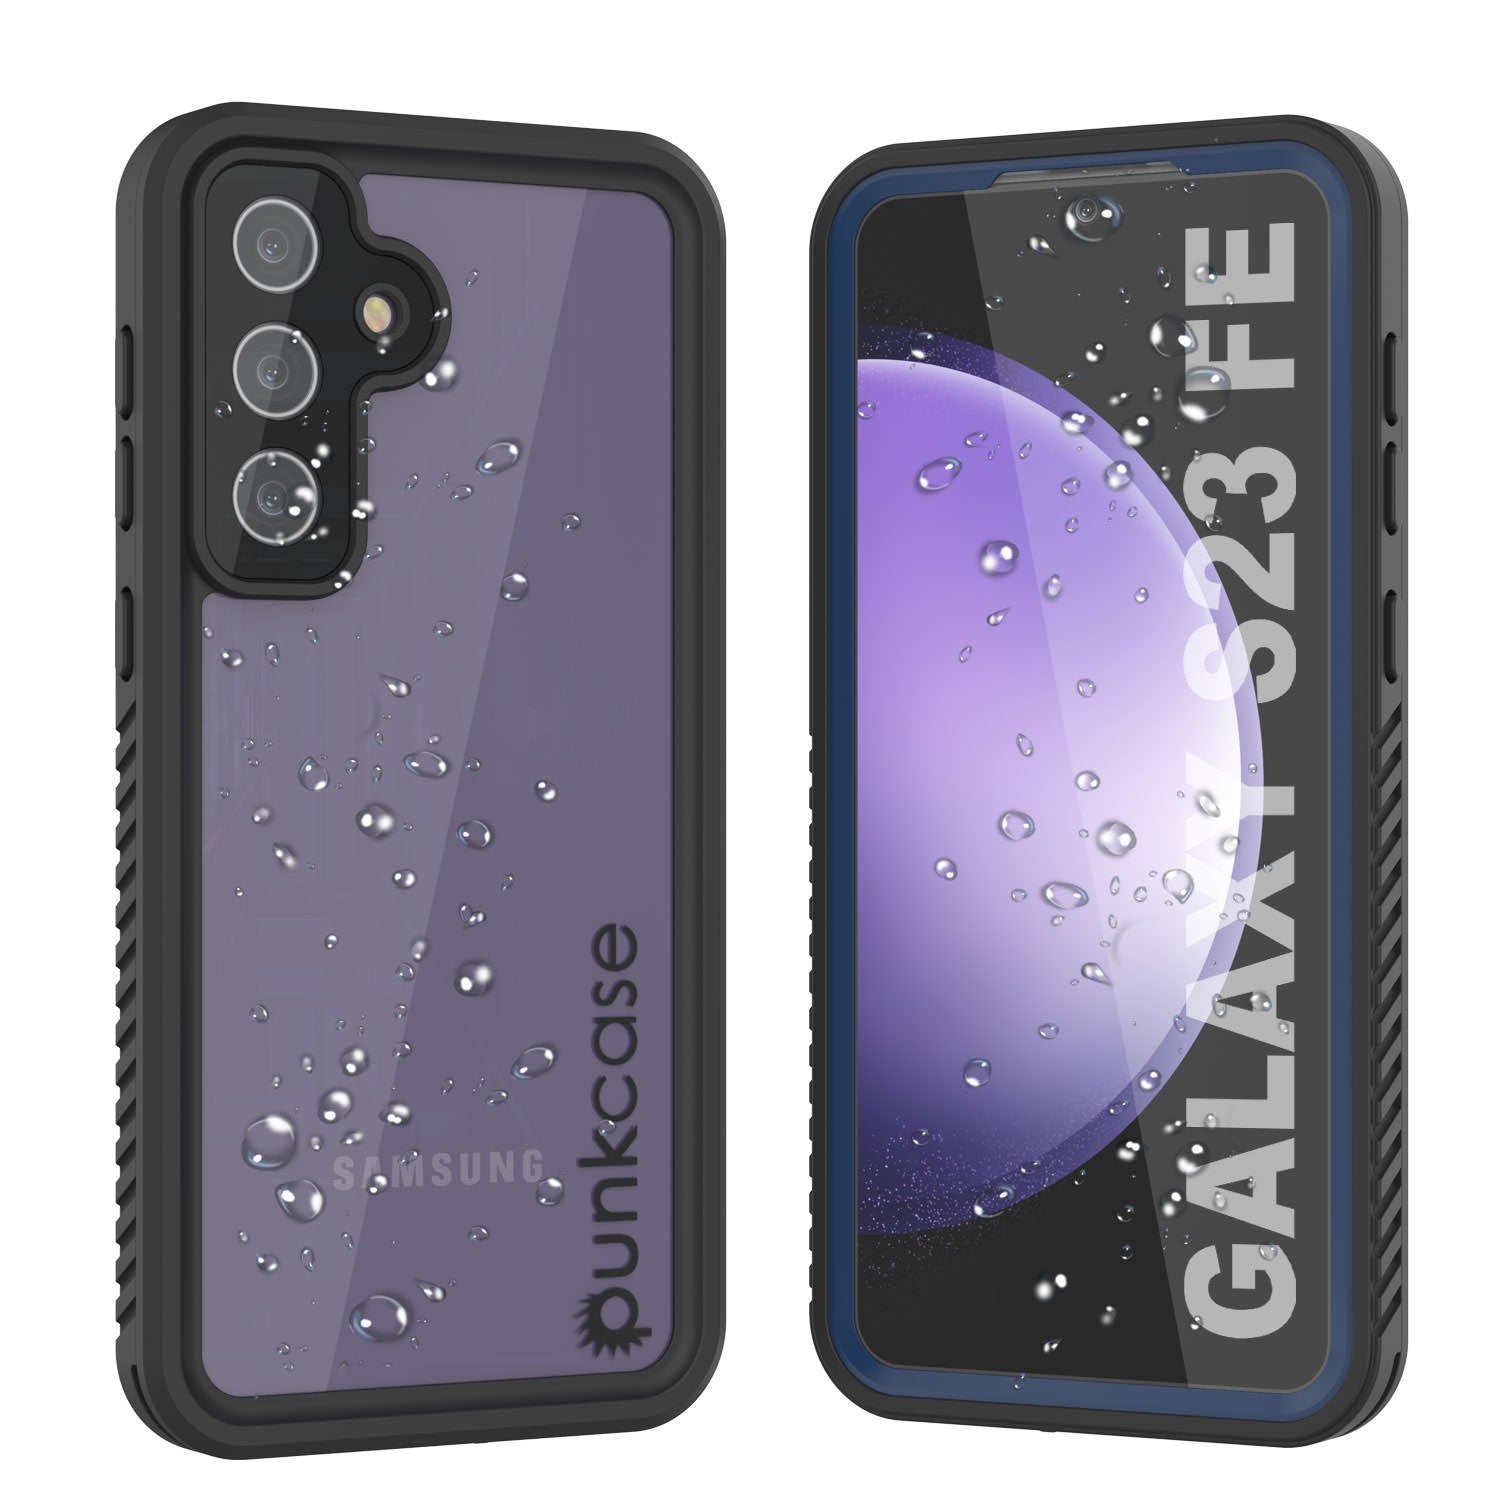 Galaxy S23 FE Water/ Shockproof [Extreme Series] With Screen Protector Case [Navy Blue]